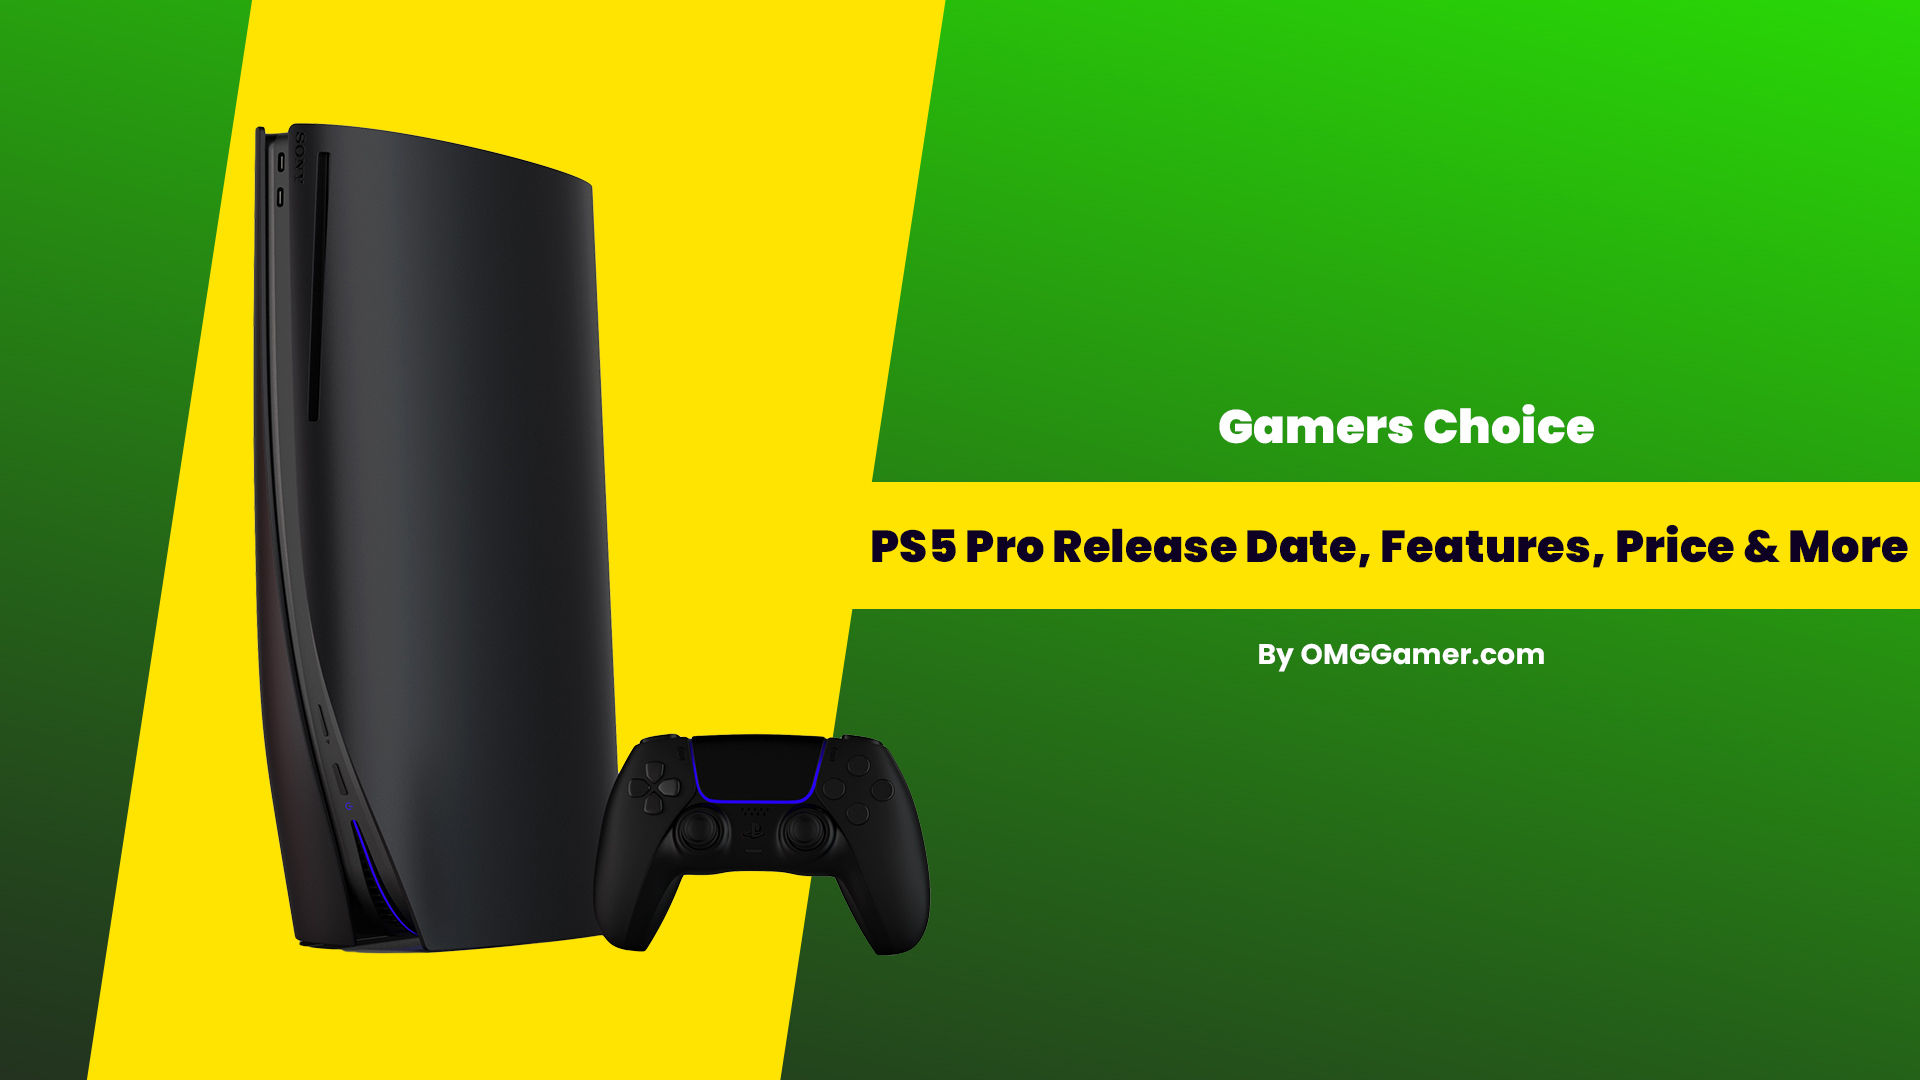 PS5 Pro Release Date, Features, Price & More